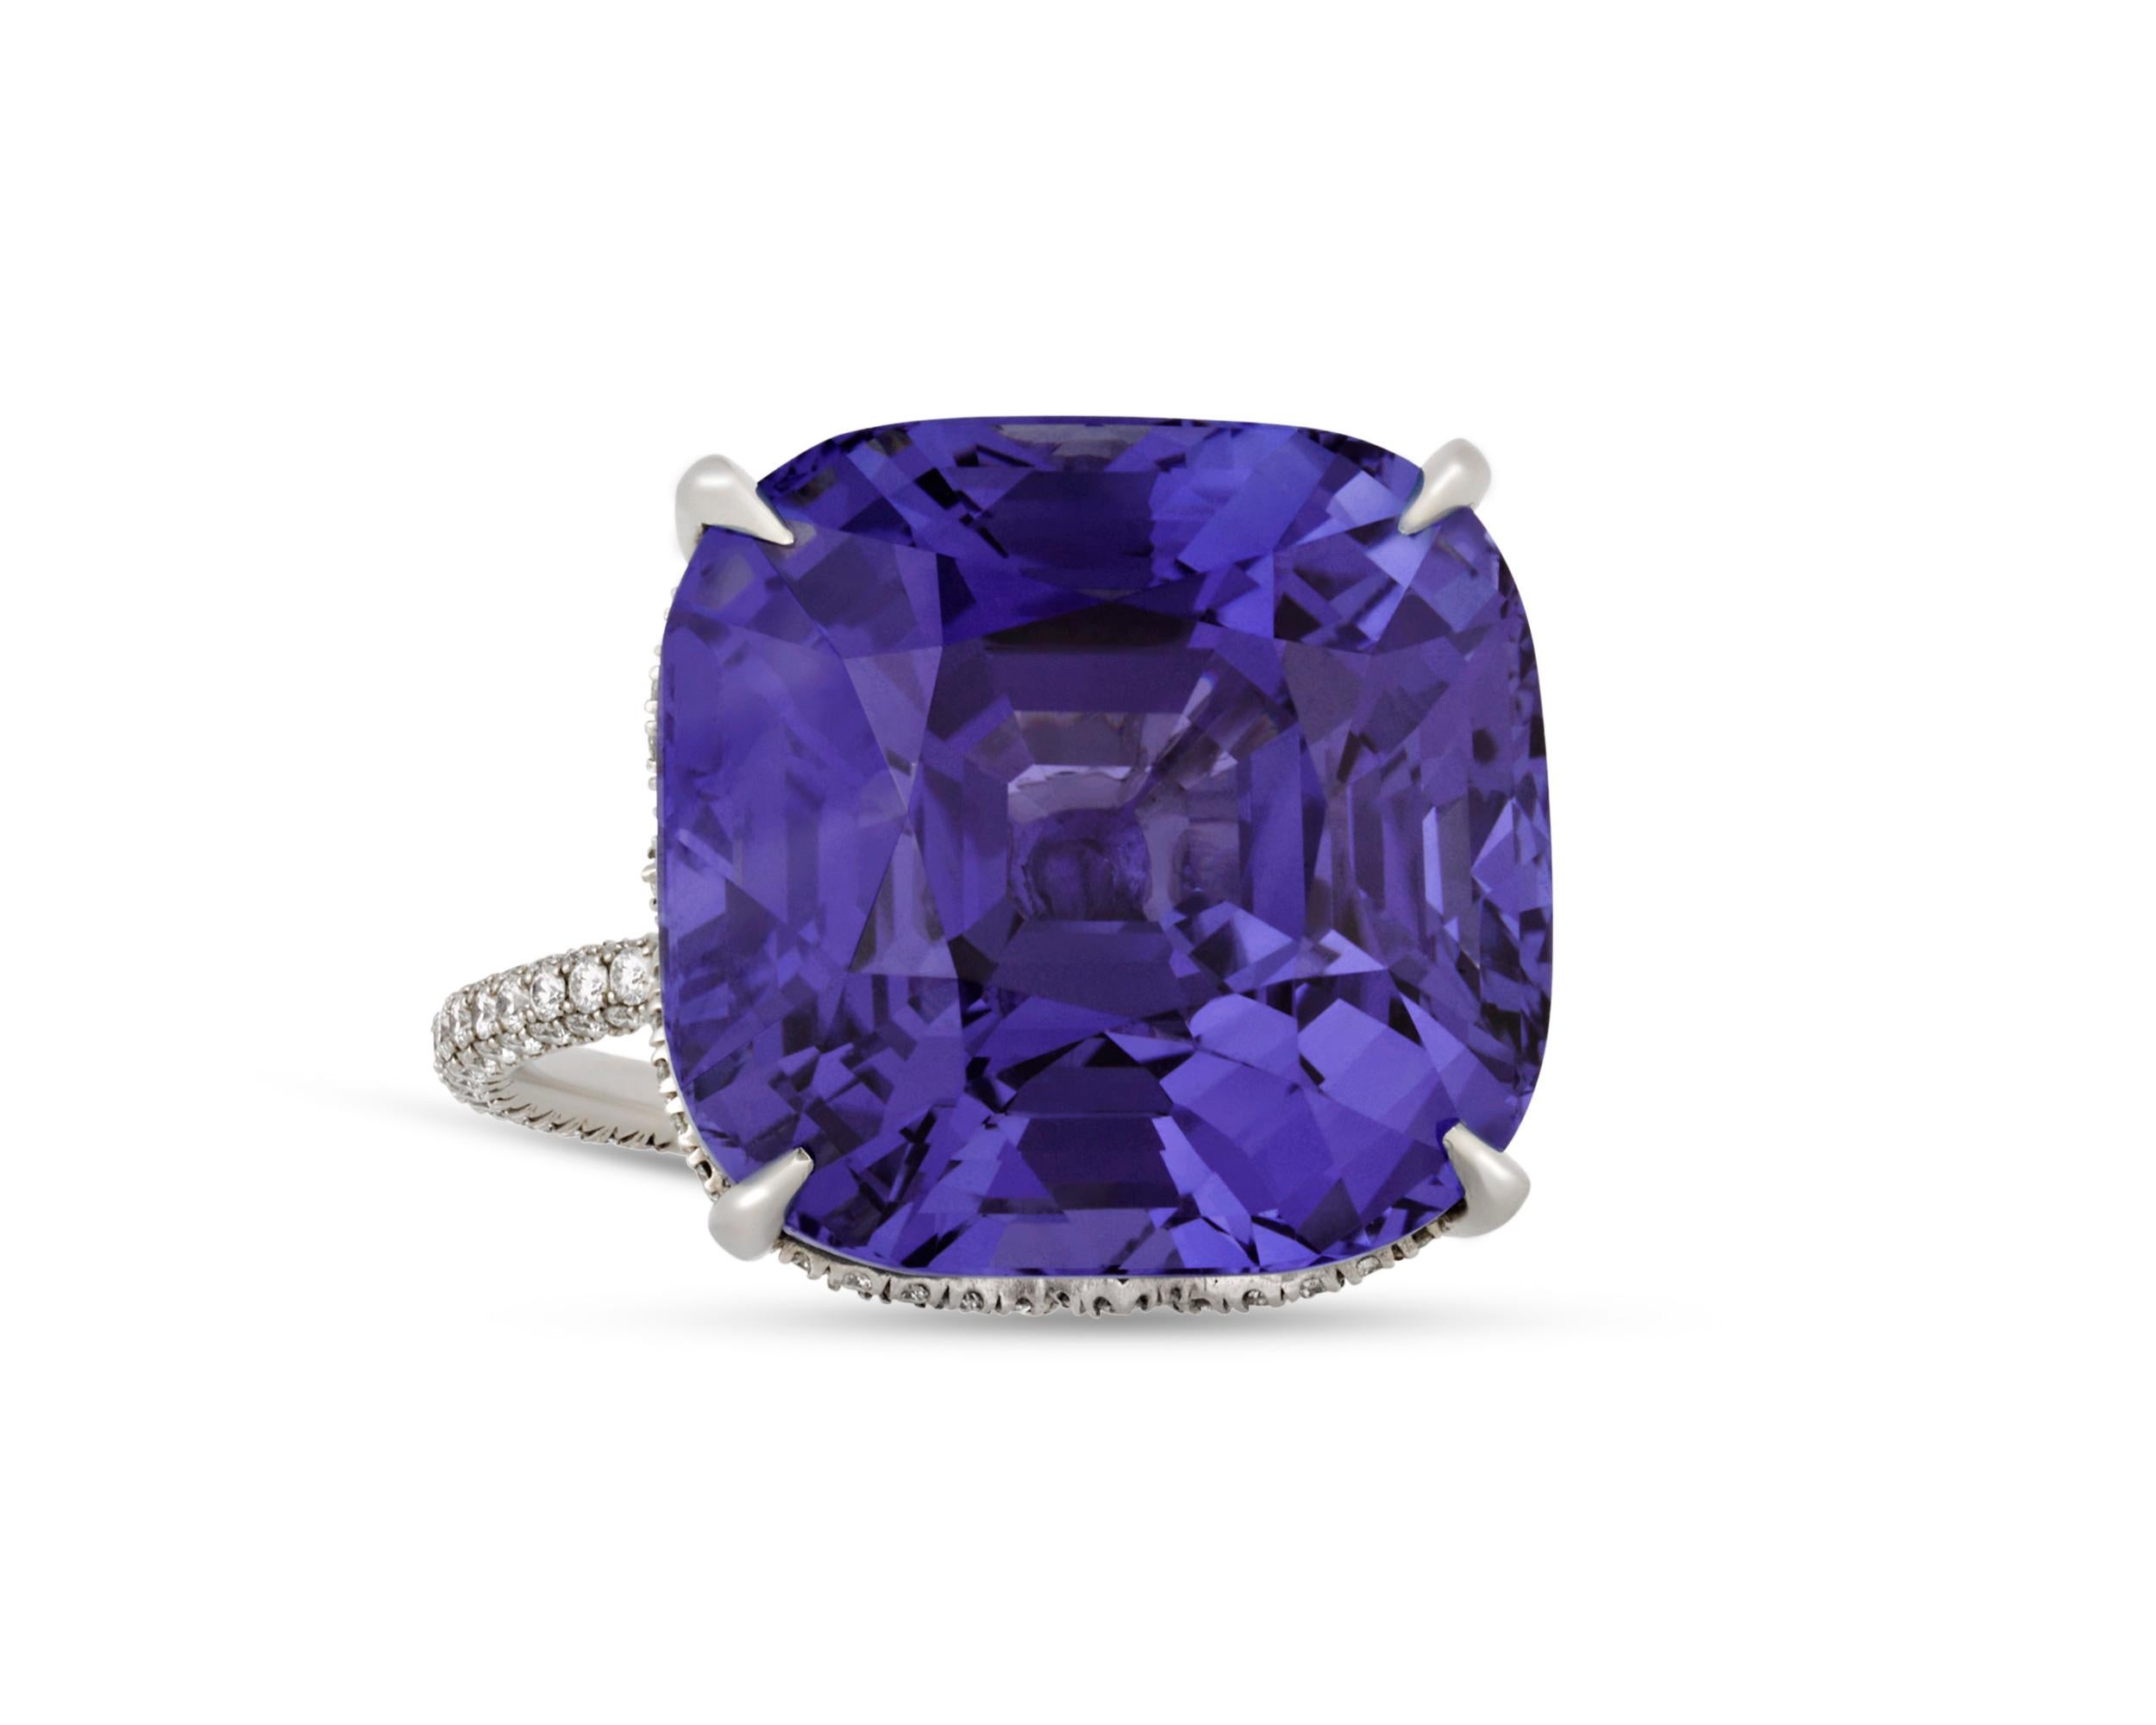 One of the most sought-after colored gemstones in the world, the color-changing sapphire possesses the rare ability to change color depending on the light. Weighing 30.03 carats, this example of the coveted gem is certified as an untreated